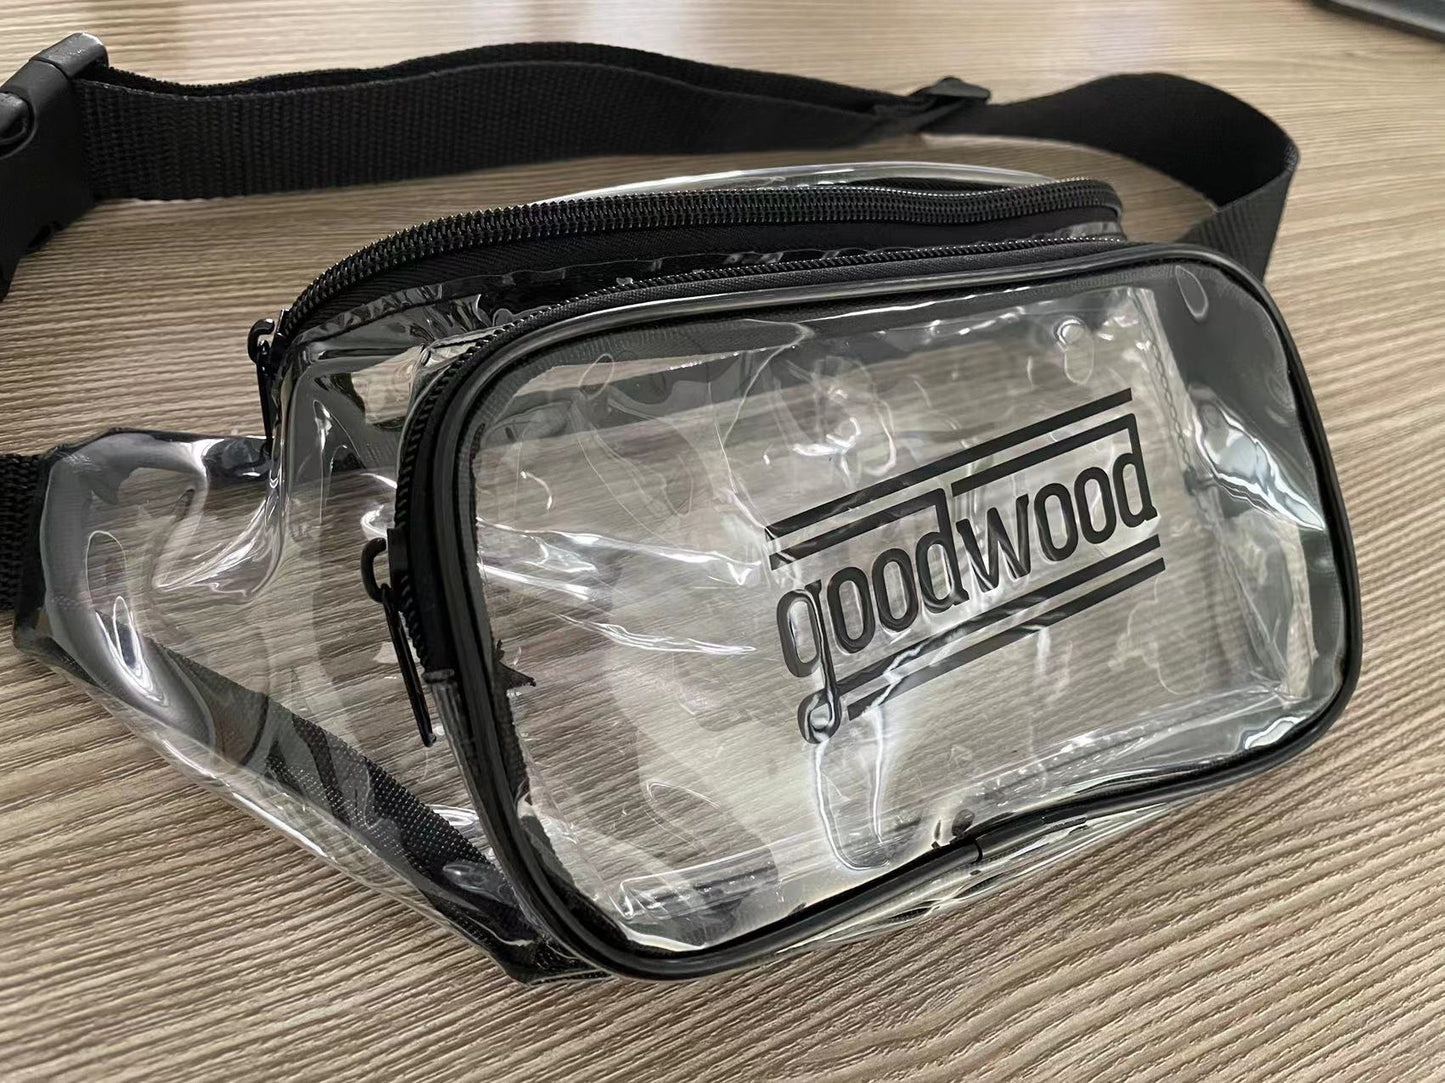 Goodwood Fanny Pack